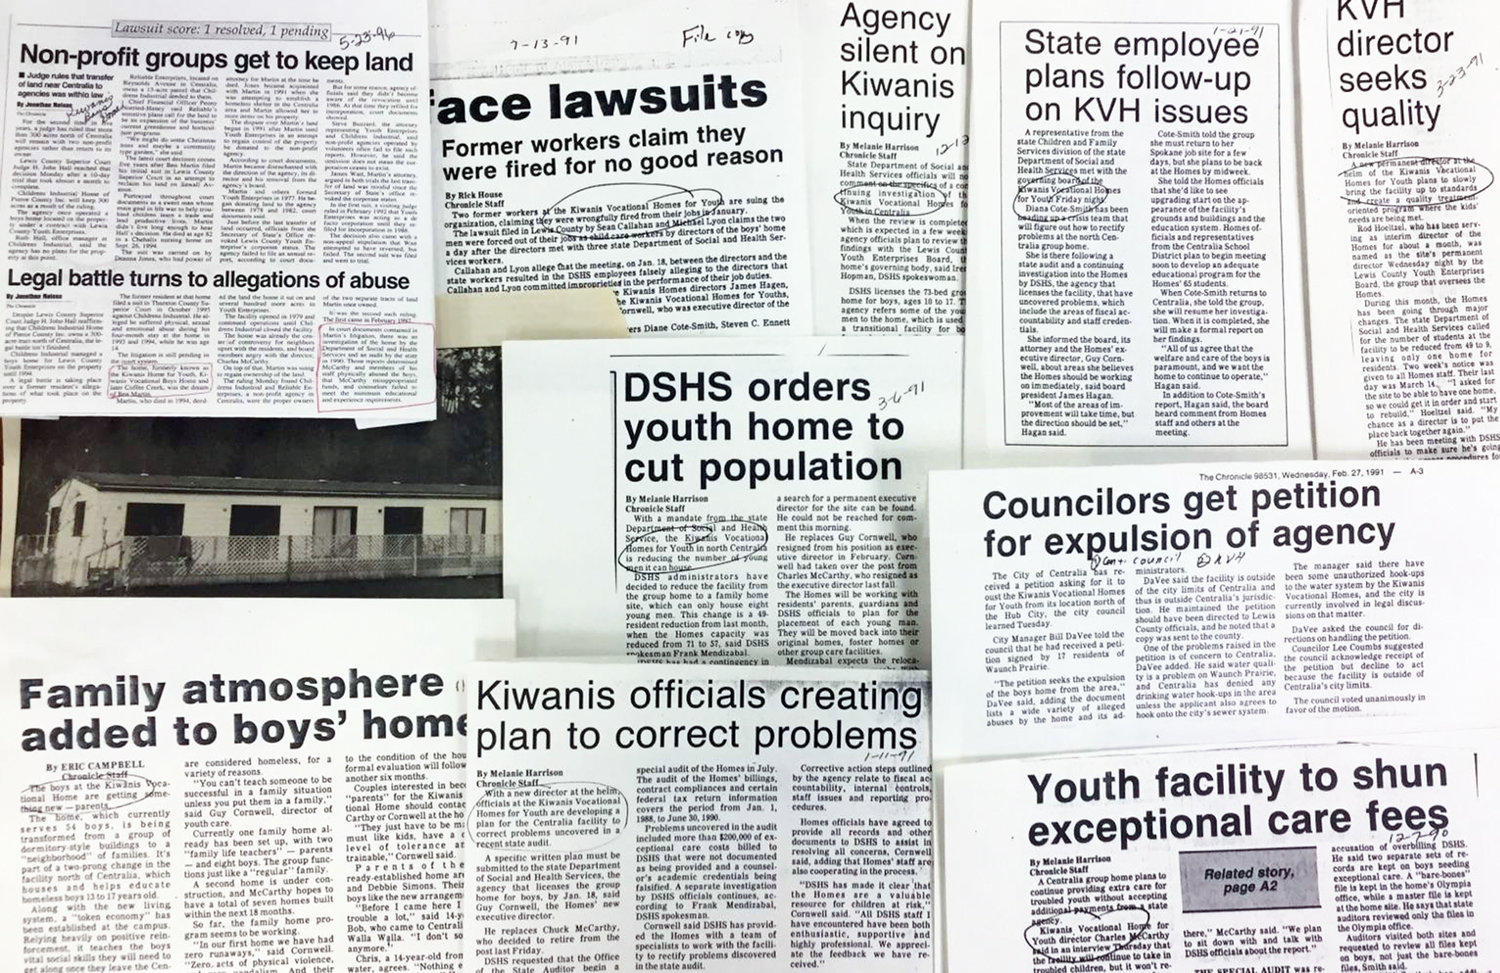 Chronicle headlines in the 1980s and 1990s alluded to trouble at the Kiwanis Vocational Home, but nothing as explosive as claims included in a number of lawsuits filed in relation to alleged abuse, negligence and fraud at the facility, which closed in 1994. 